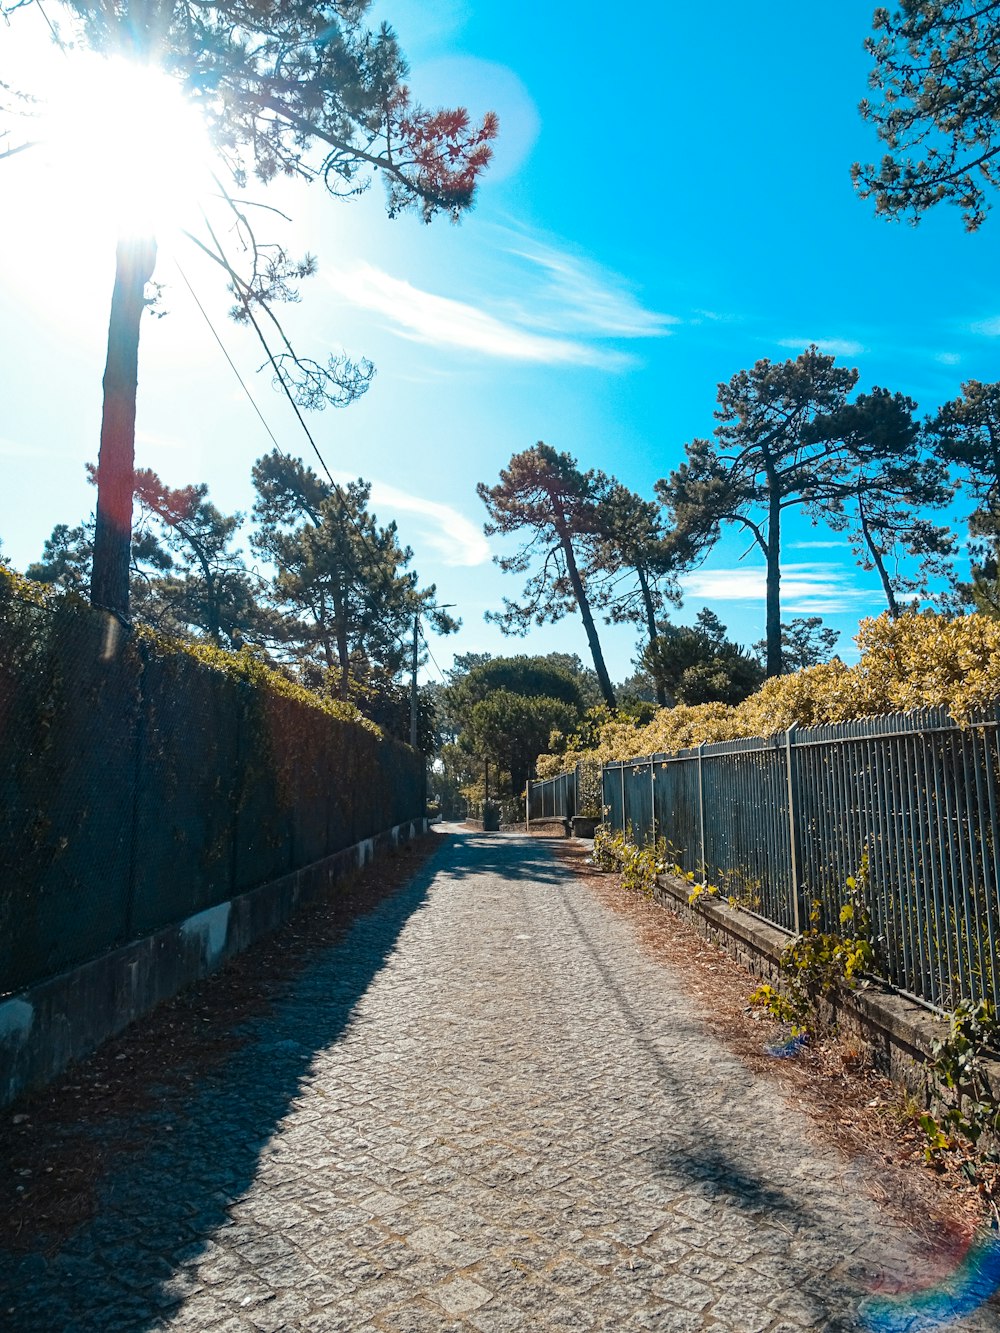 a street with a fence and trees in the background